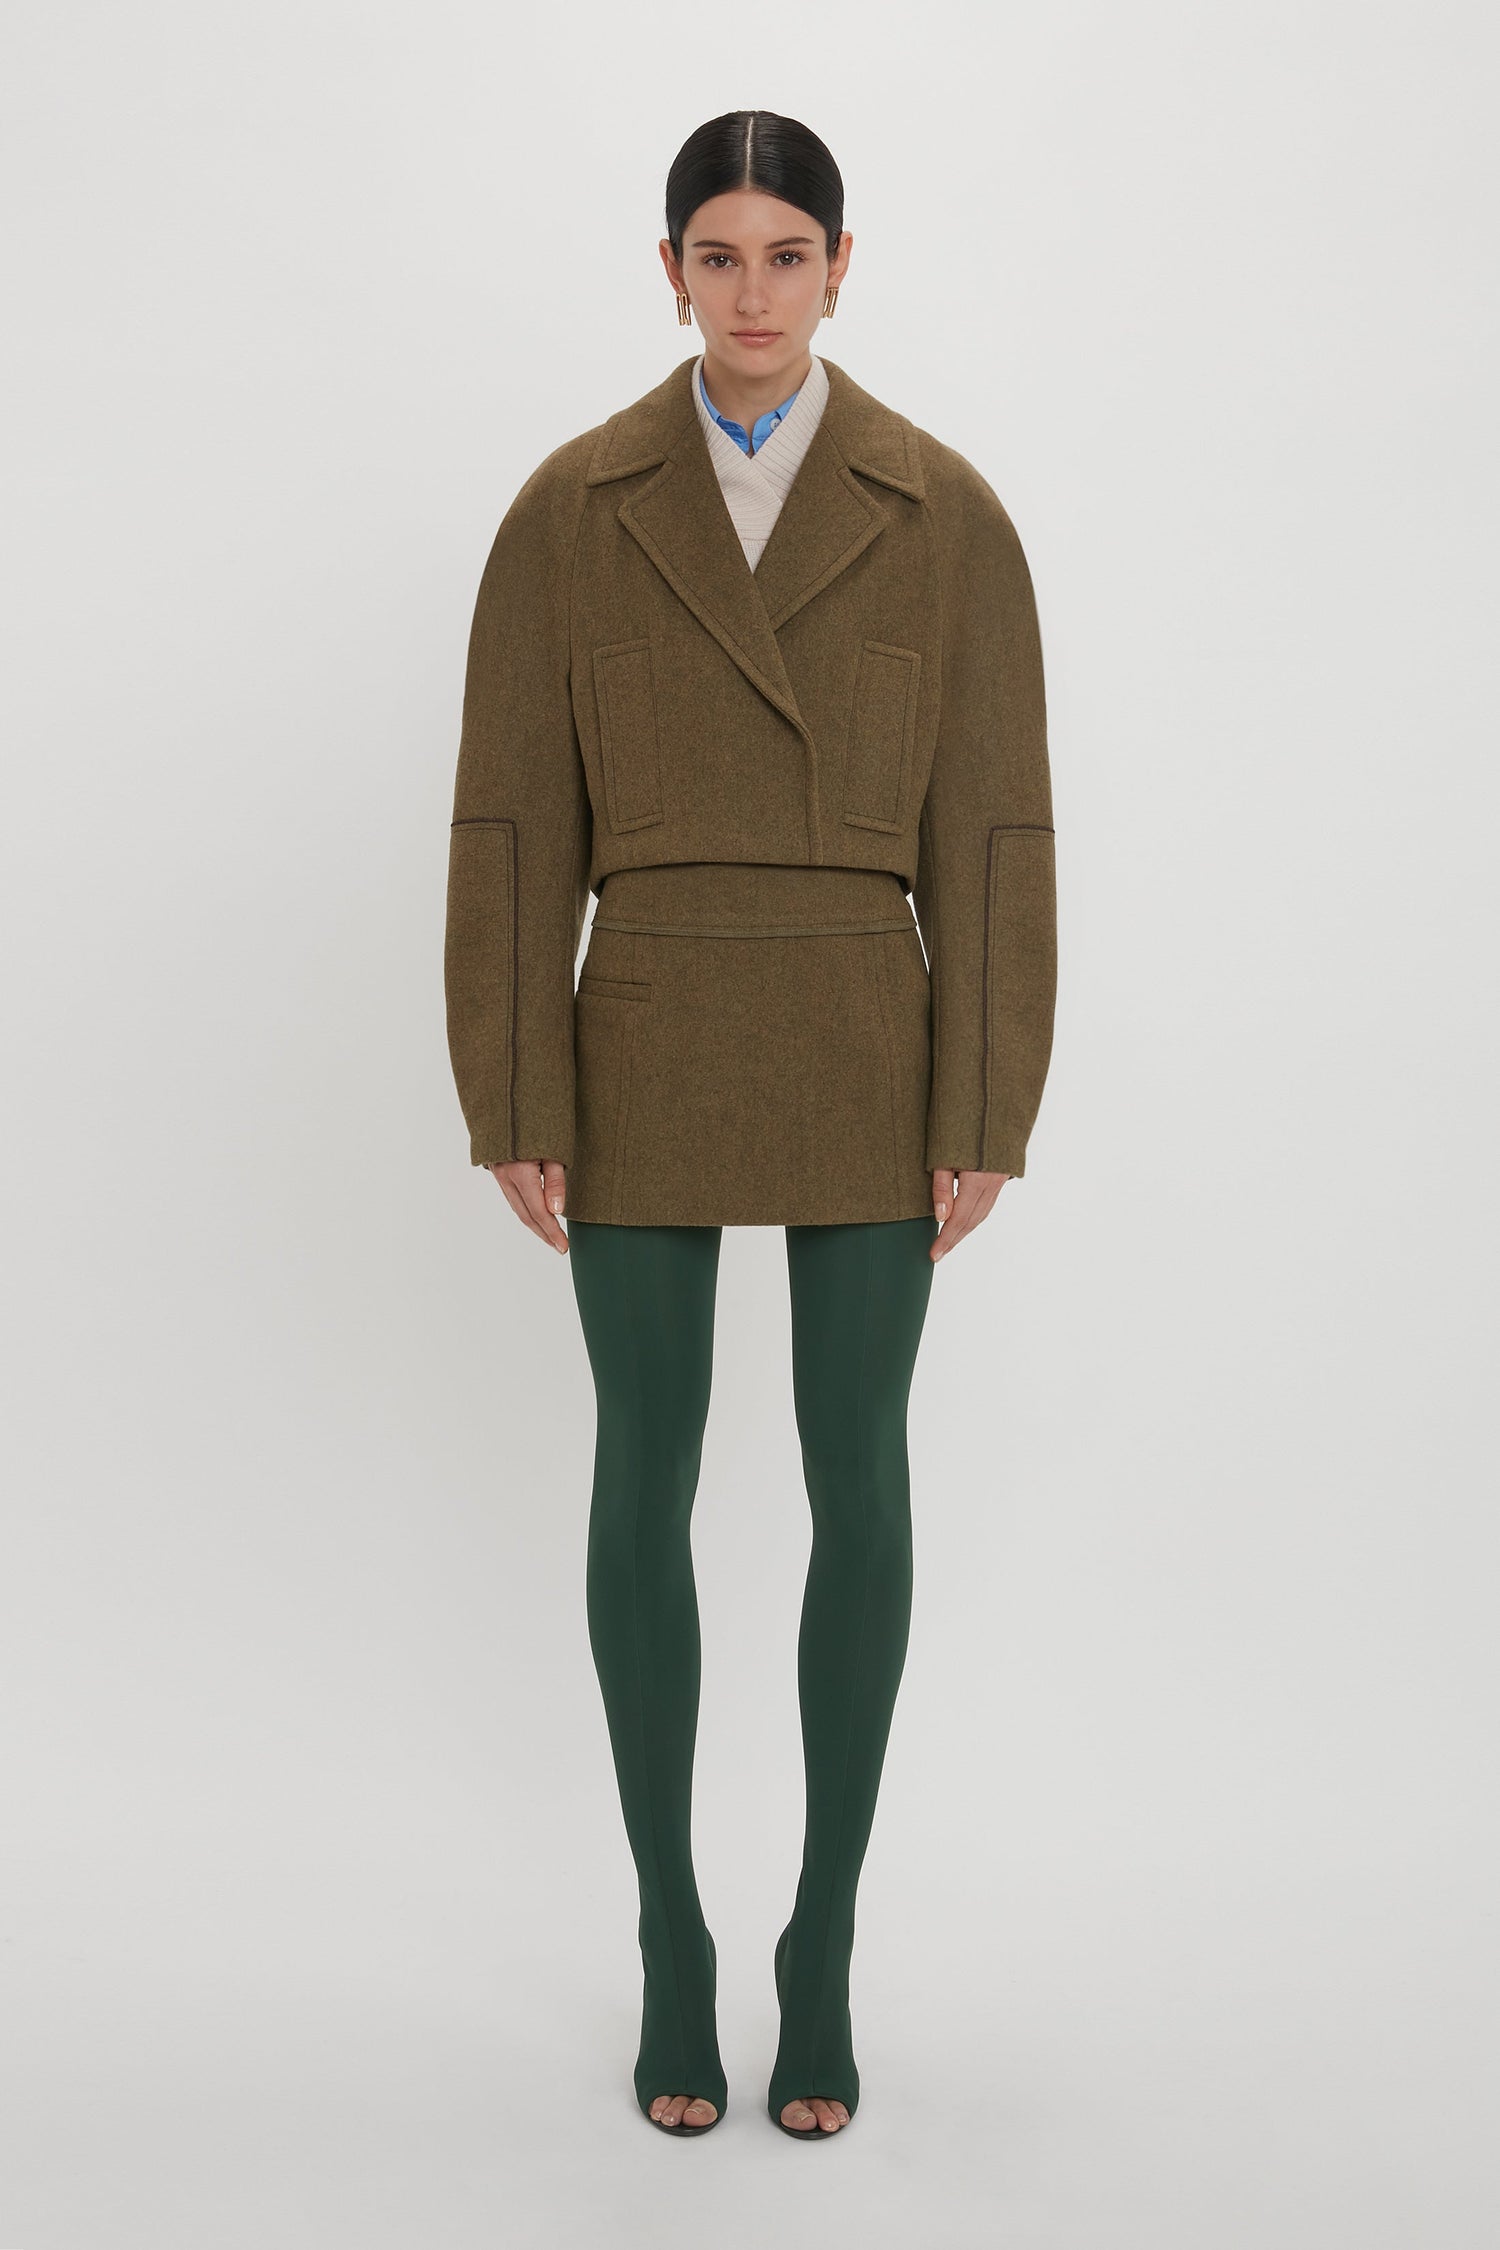 A person stands against a white background wearing a brown oversized jacket, a Tailored Mini Skirt In Khaki by Victoria Beckham, green tights, and open-toe shoes.